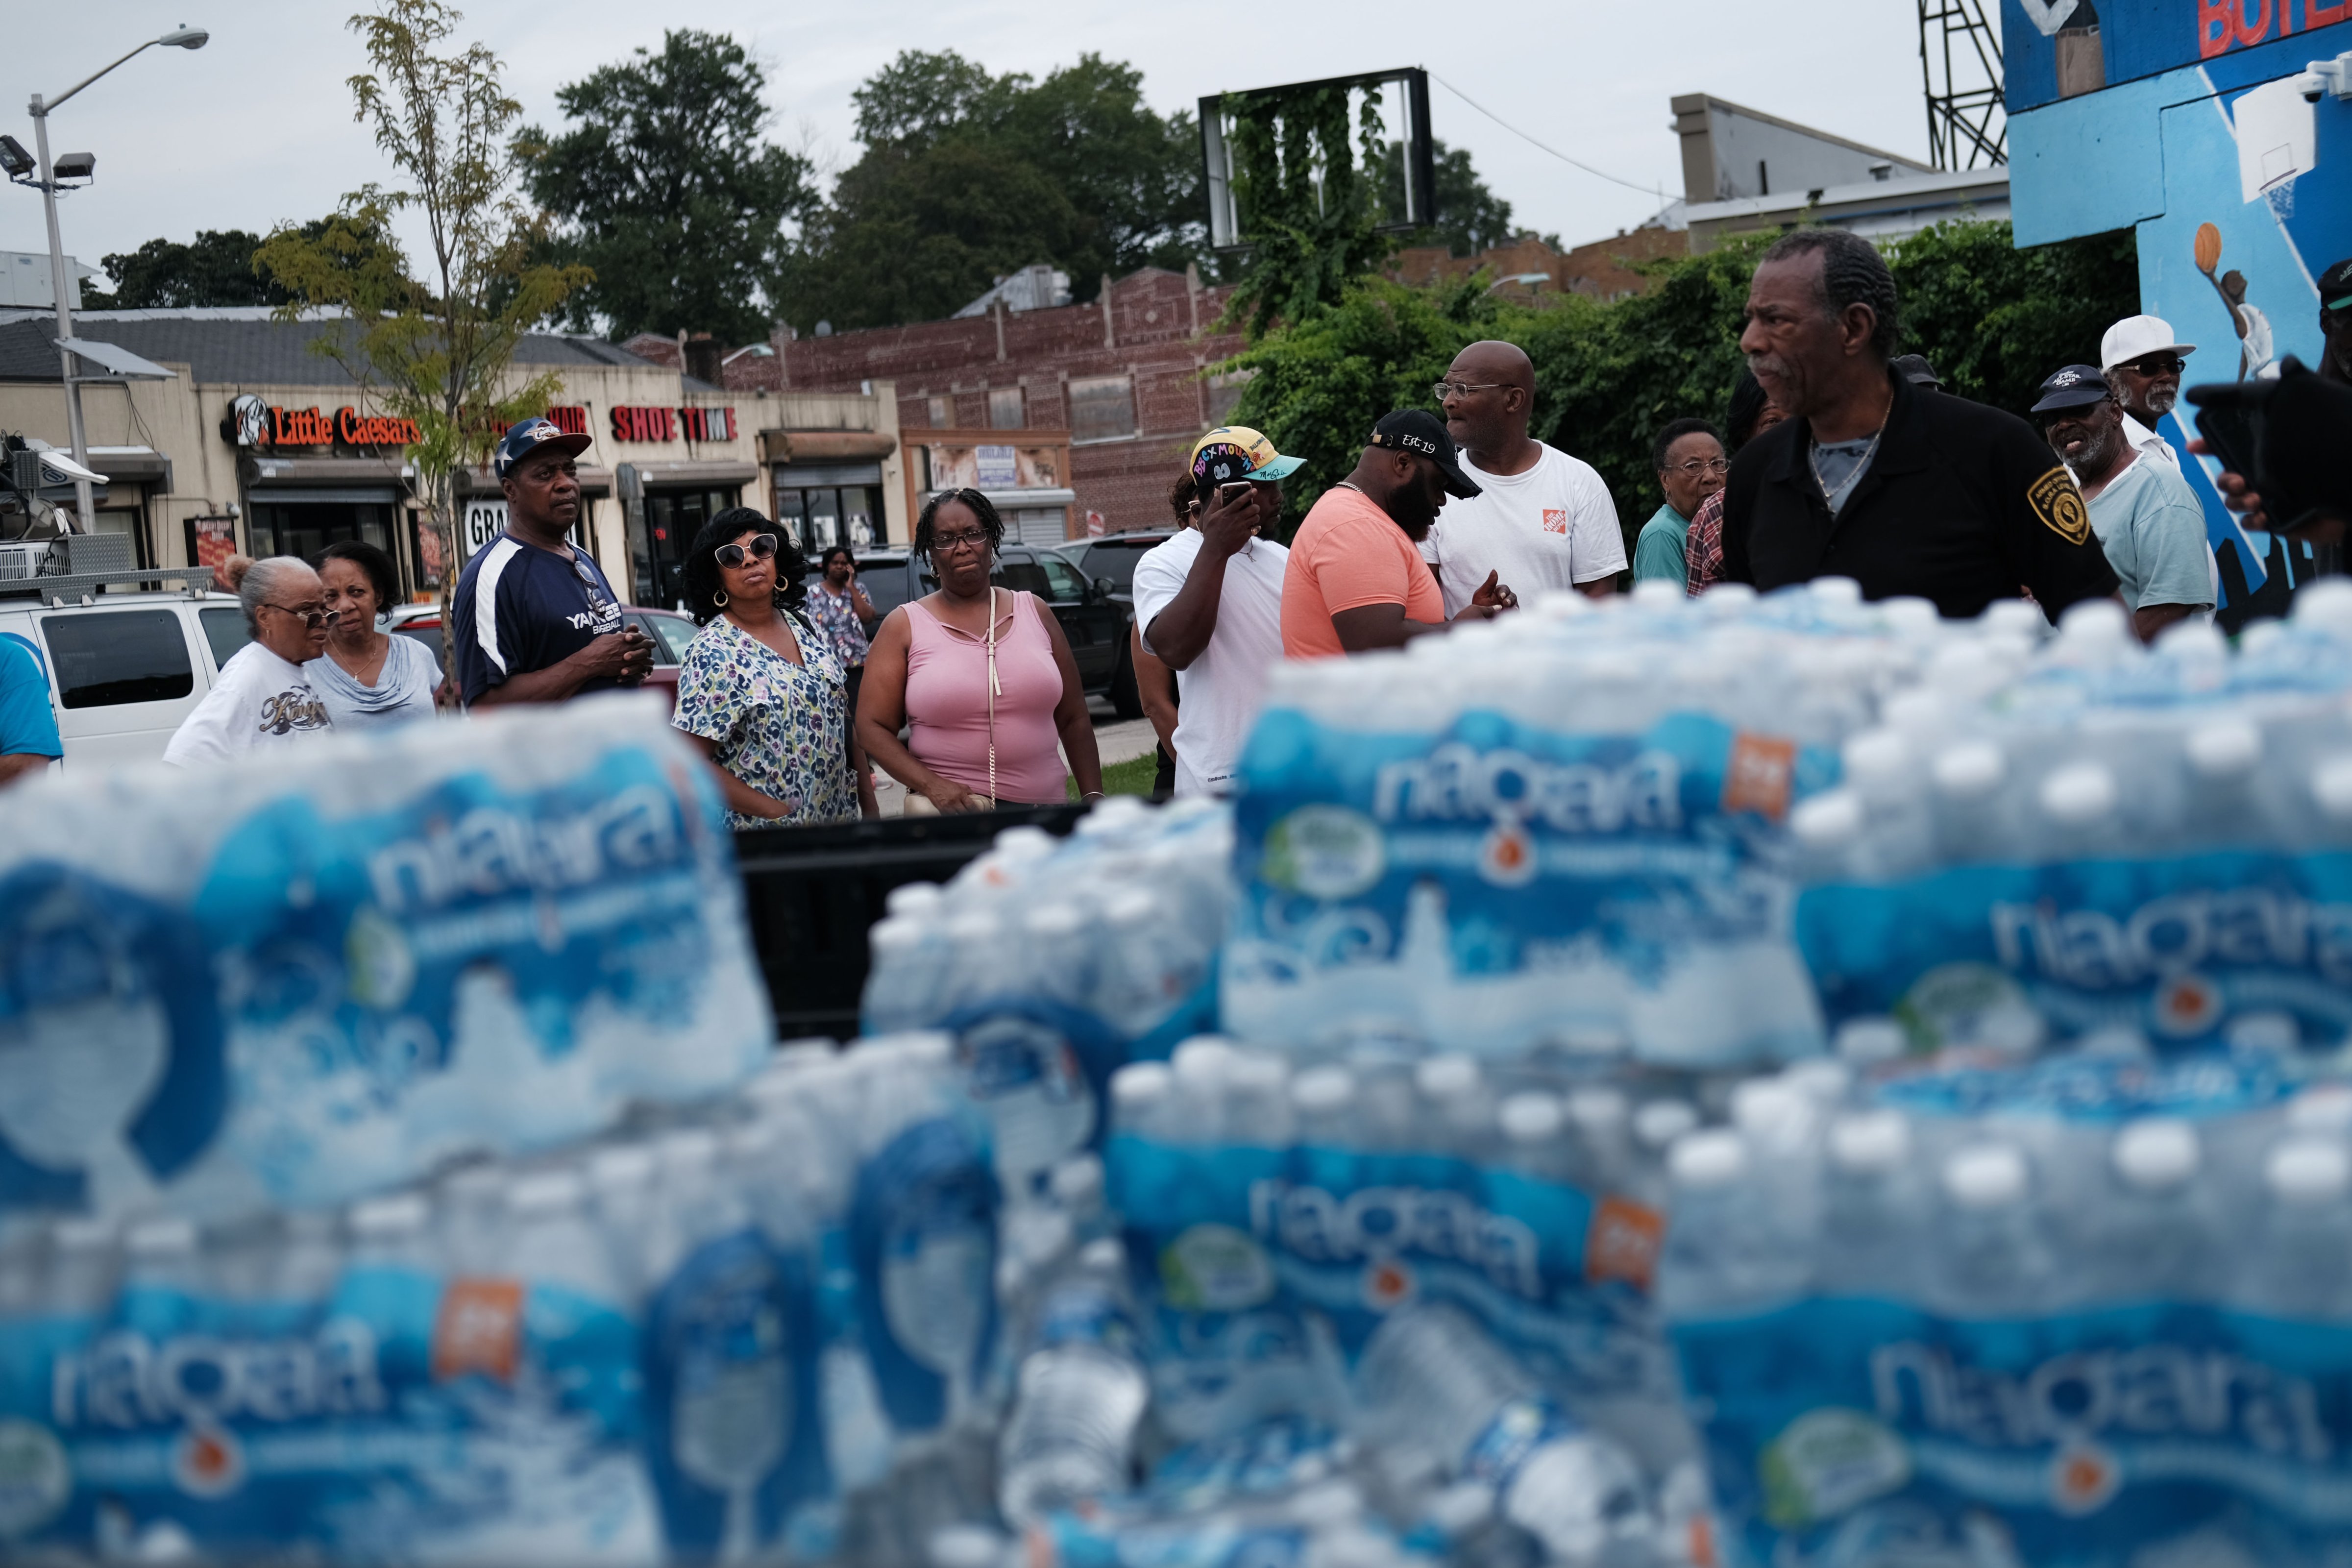 Bottled water is delivered to a recreation center on August 13, 2019 in Newark, New Jersey. Residents of Newark, the largest city in New Jersey, are to receive free water after lead was found in the tap water (Spencer Platt—Getty Images)